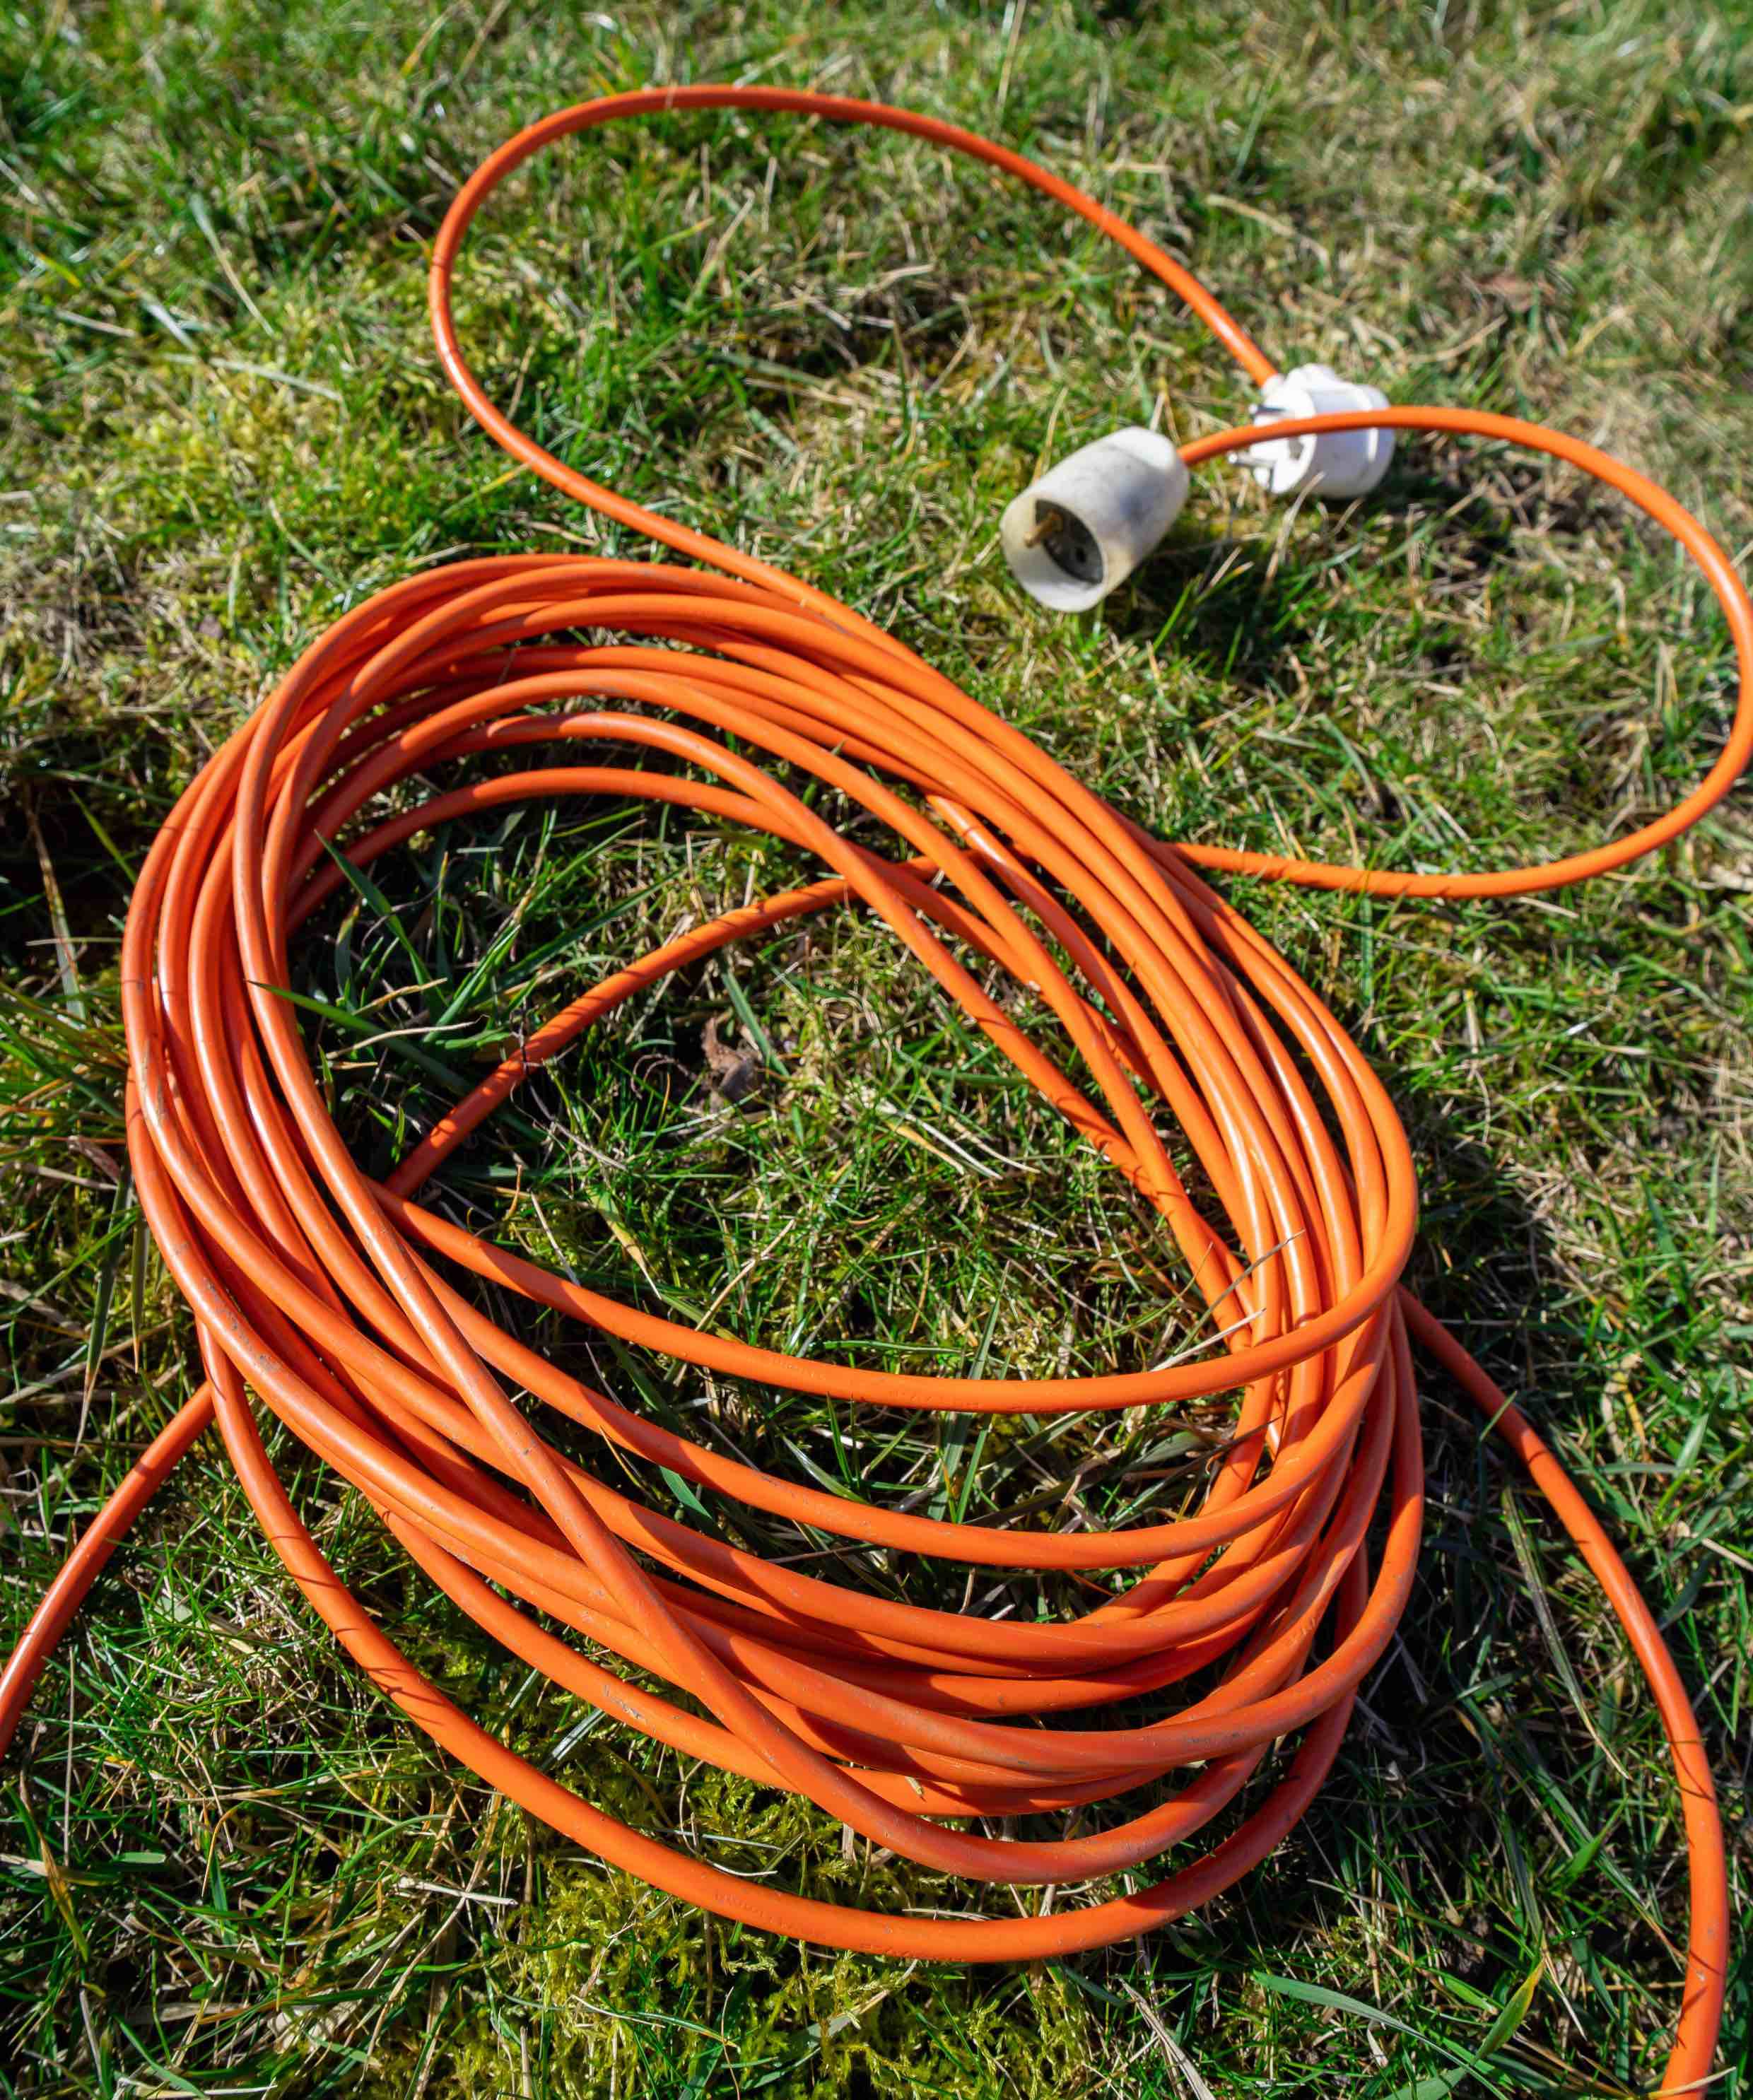 An orange extension cord in the grass - use extensions cords for your outdoor lighting.